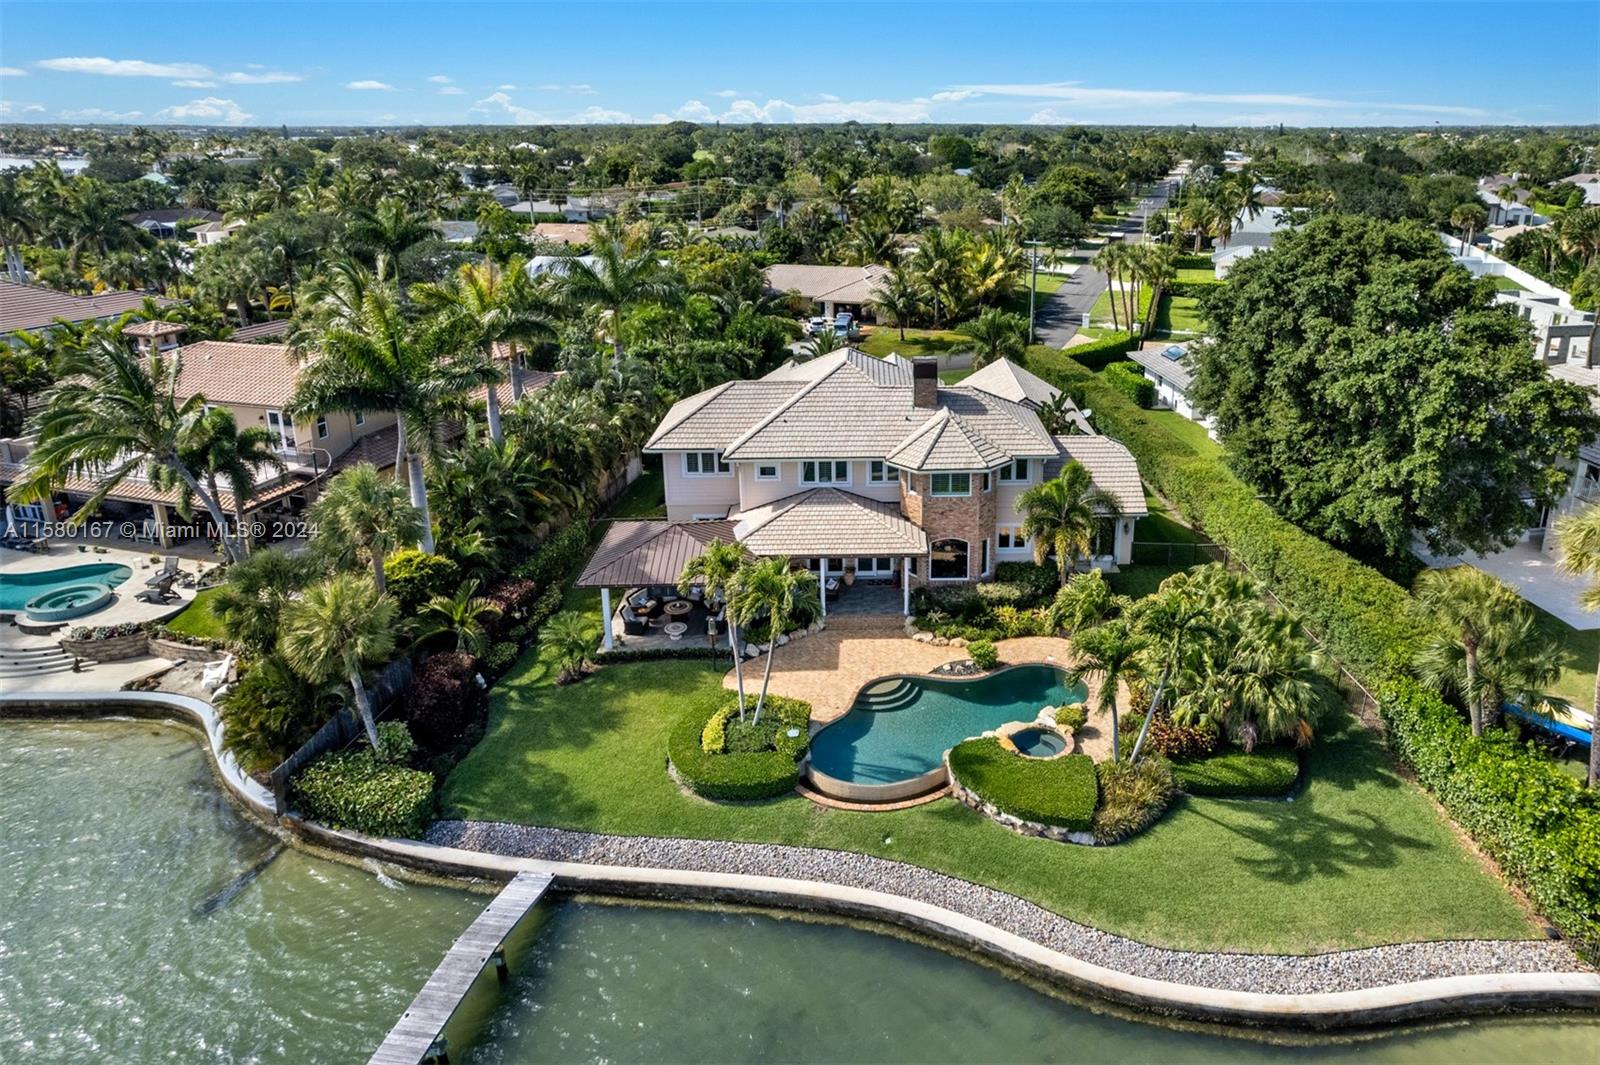 Property for Sale at 20 Yacht Club Pl Pl, Tequesta, Martin County, Florida - Bedrooms: 5 
Bathrooms: 4  - $11,500,000